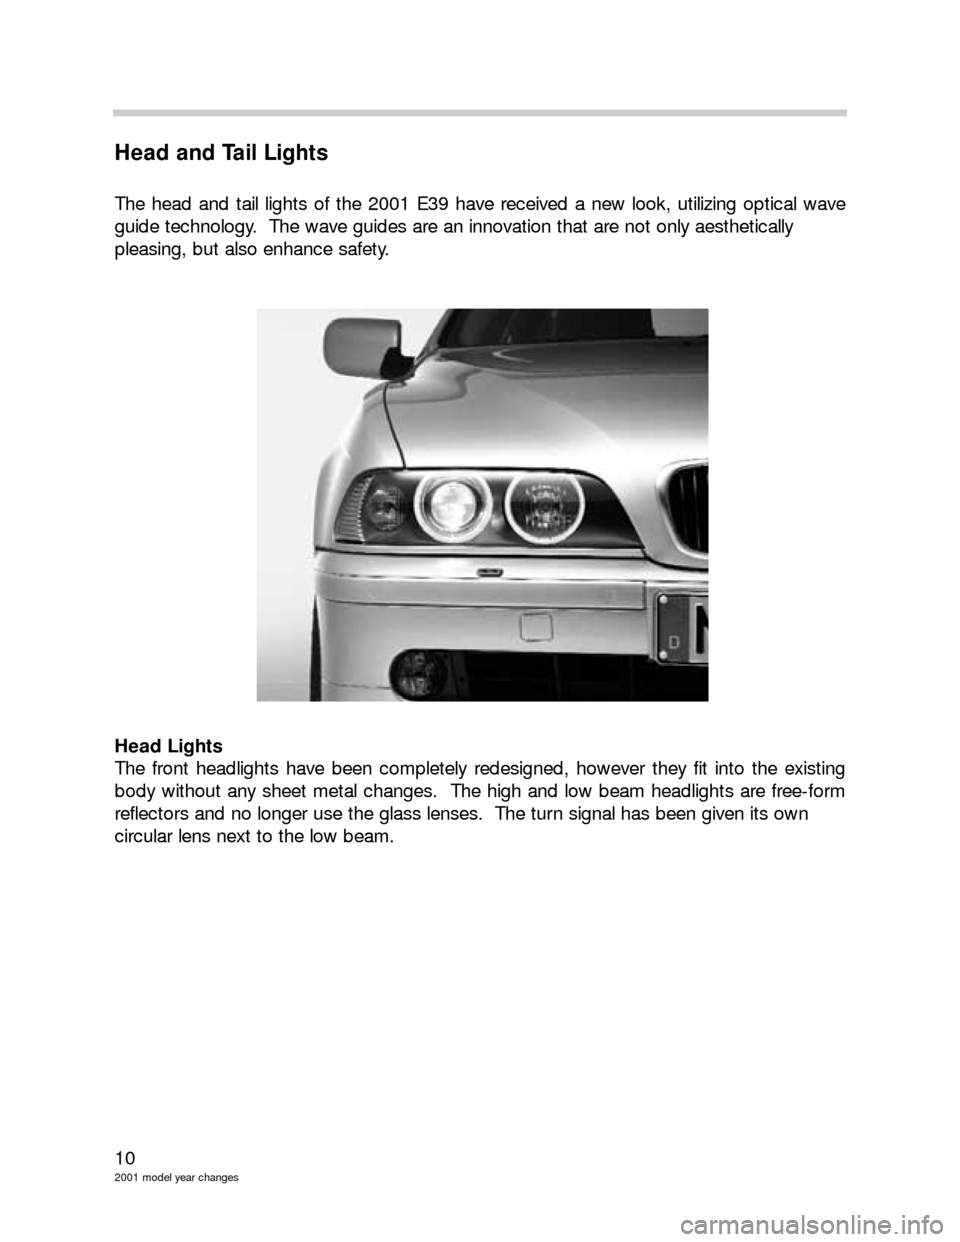 BMW 3 SERIES 2005 E46 Model Yar Changes 10
2001 model year changes
Head and Tail Lights
The head and tail lights of the 2001 E39 have received a new look, utilizing optical wave
guide technology.  The wave guides are an innovation that are 